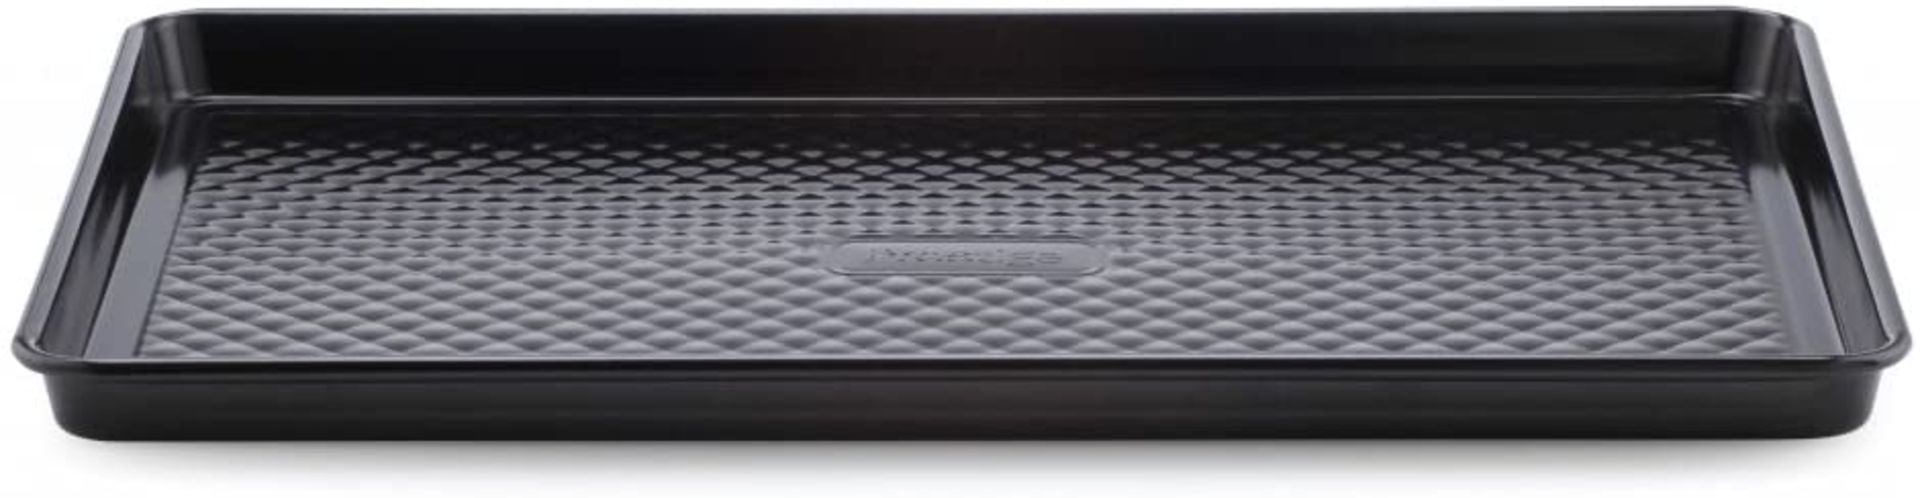 RRP - £11.99 Prestige Inspire - Large Oven Tray - Non Stick - Heavy Gauge Carbon